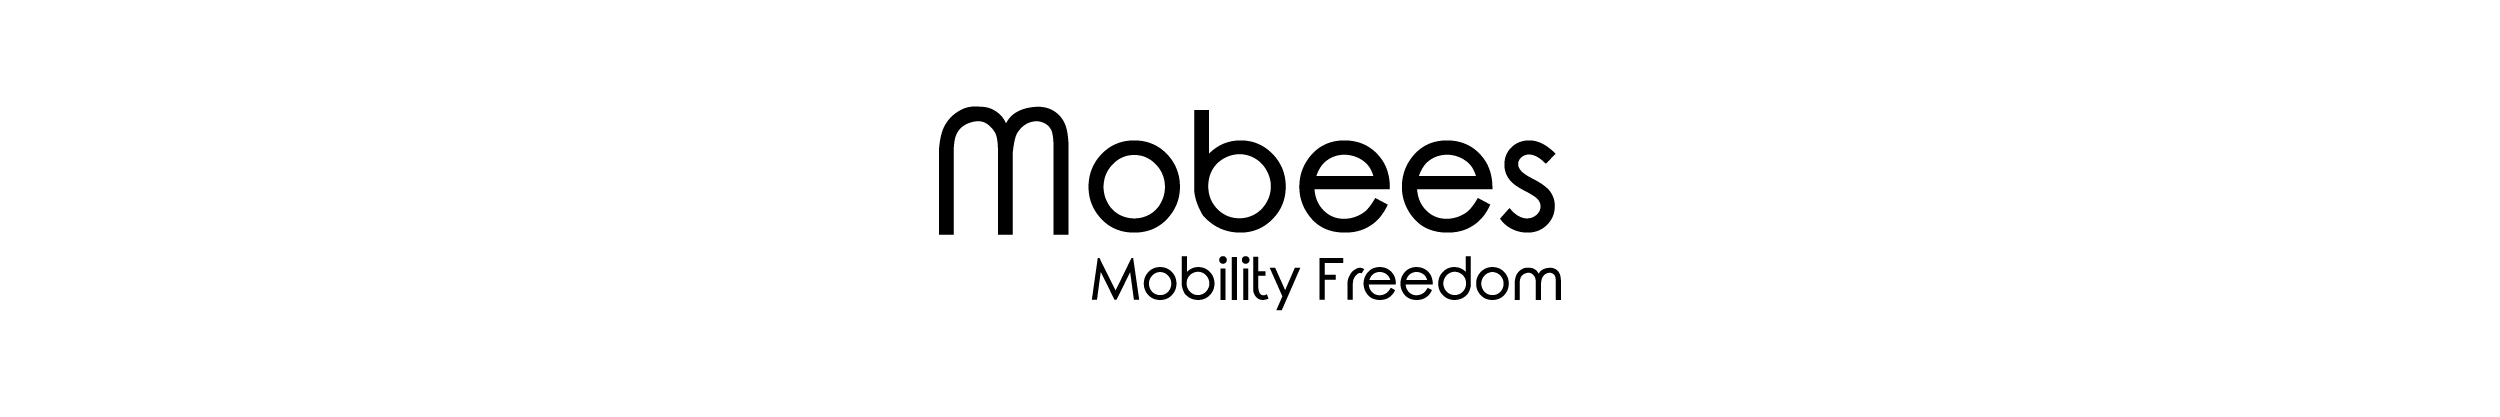 Mobees